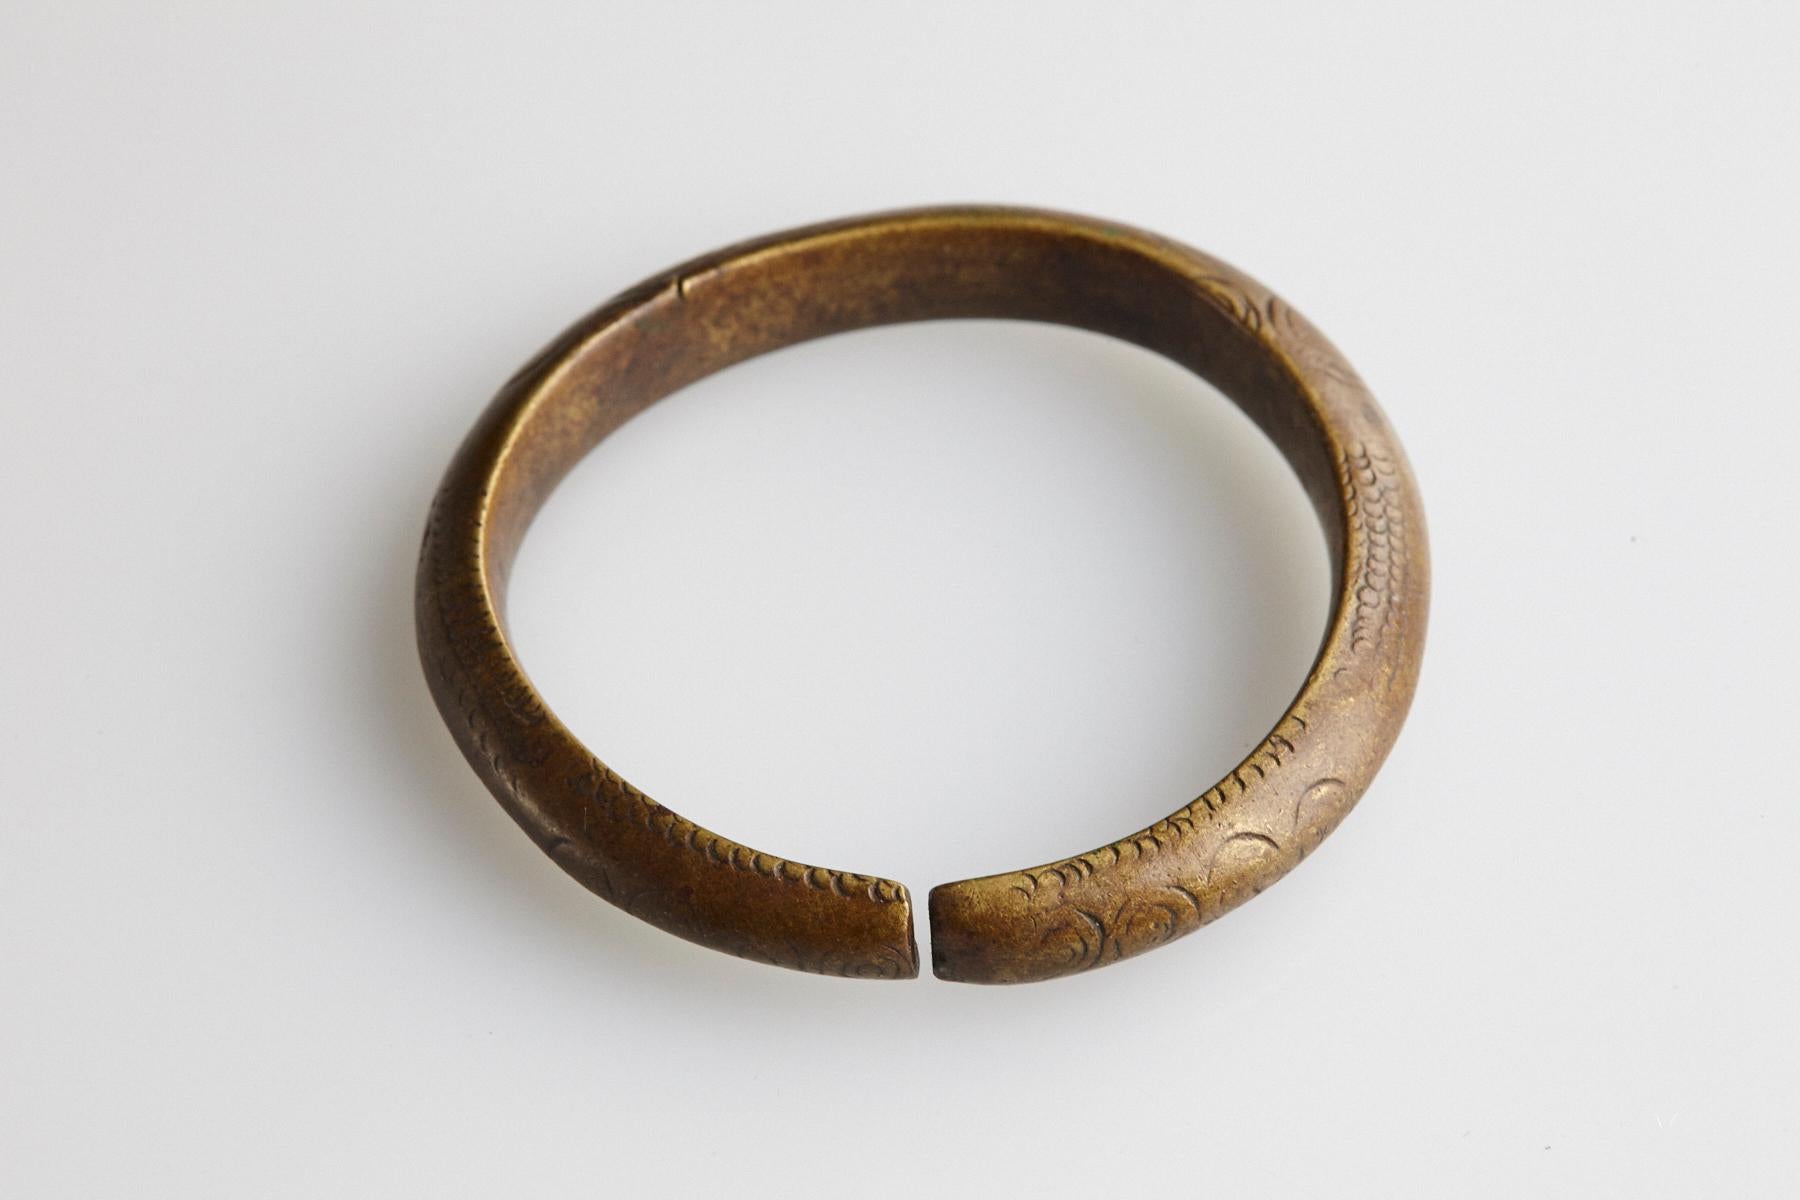 19th-century bronze currency bangle / Manilla with a fixed opening. Minimalist, simple design work with engraved geometrical circles and lines.
This type of bracelet was used and worn by the Oromo People, who are living in the south of